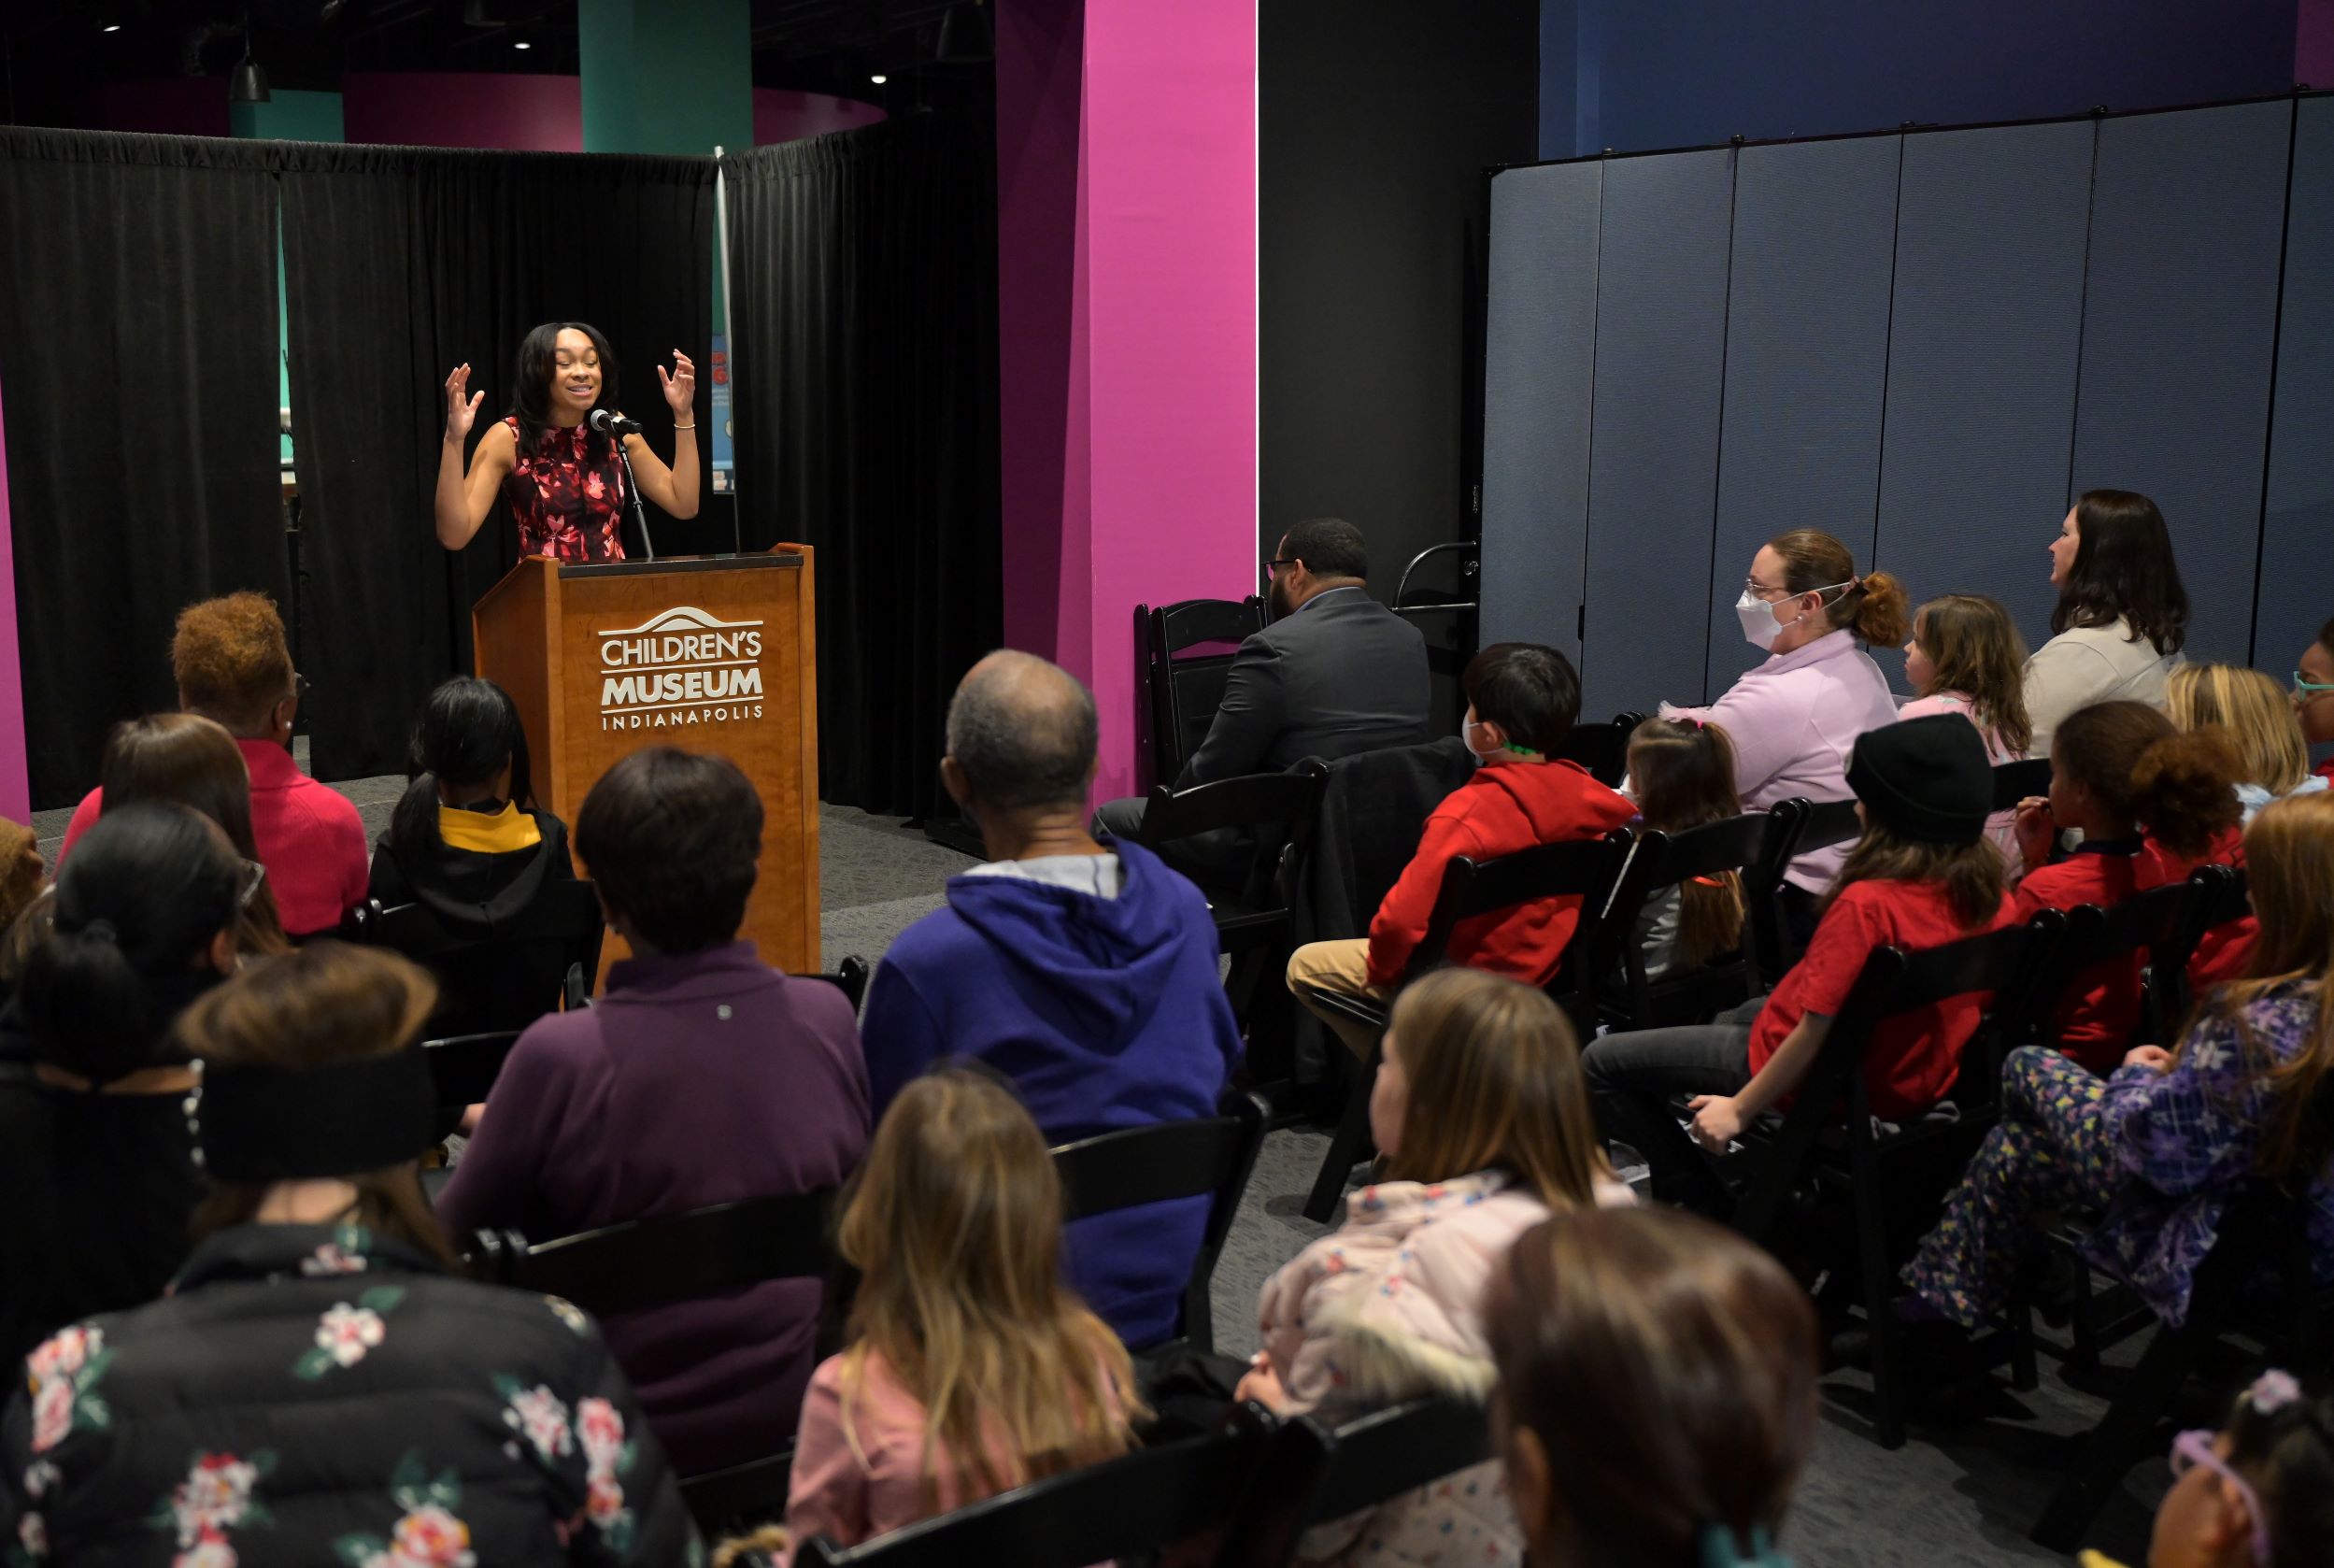 National Youth Poet Laureate shares poetry during Black History Month at The Children's Museum of Indianapolis